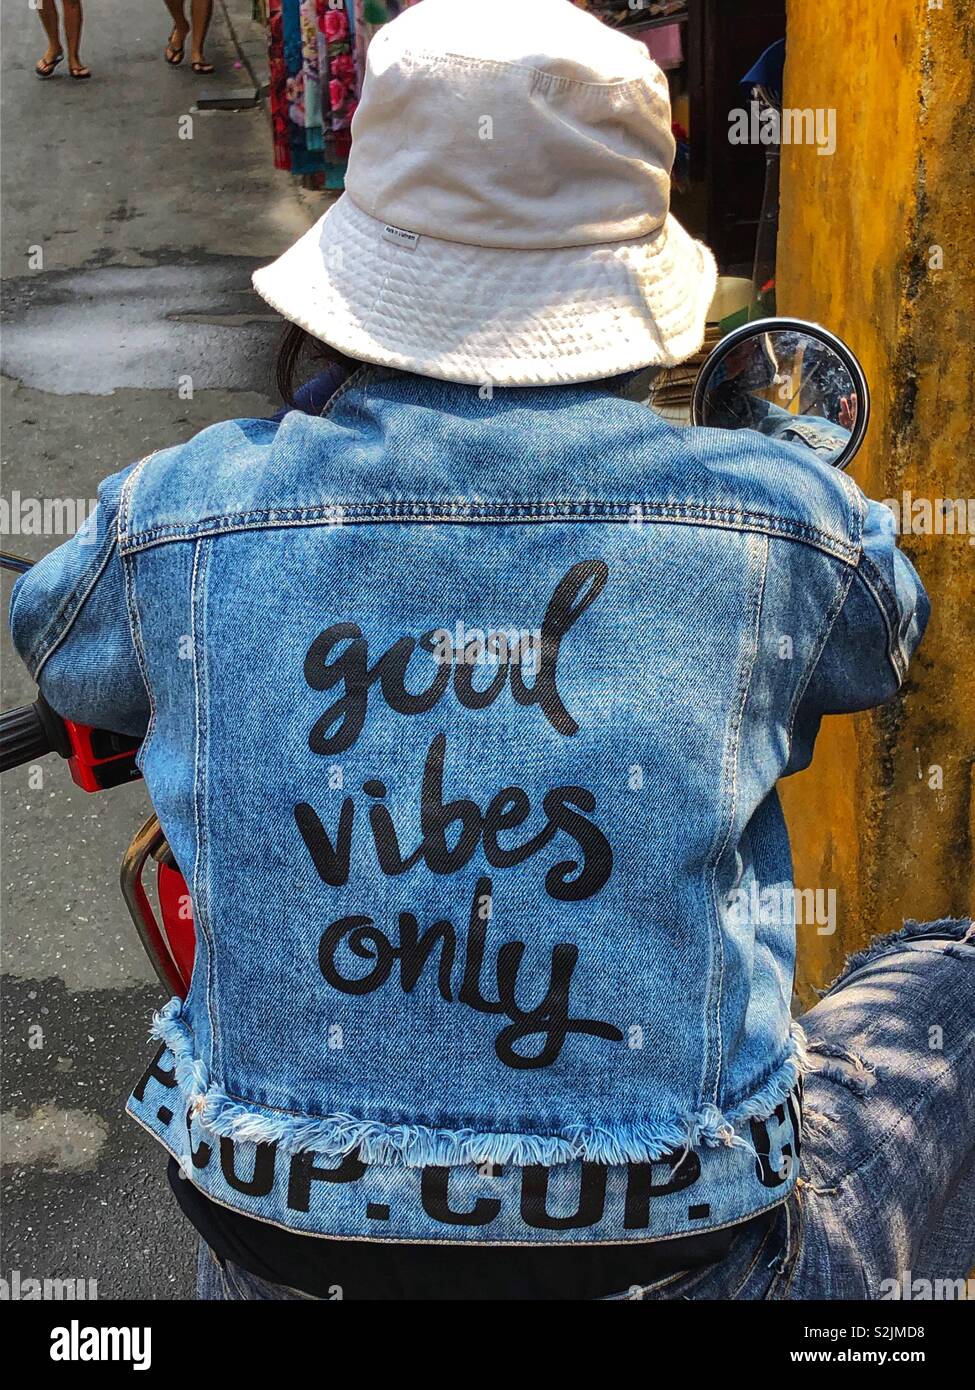 Good vibes only - motorcycle jeans jacket. Adia Stock Photo